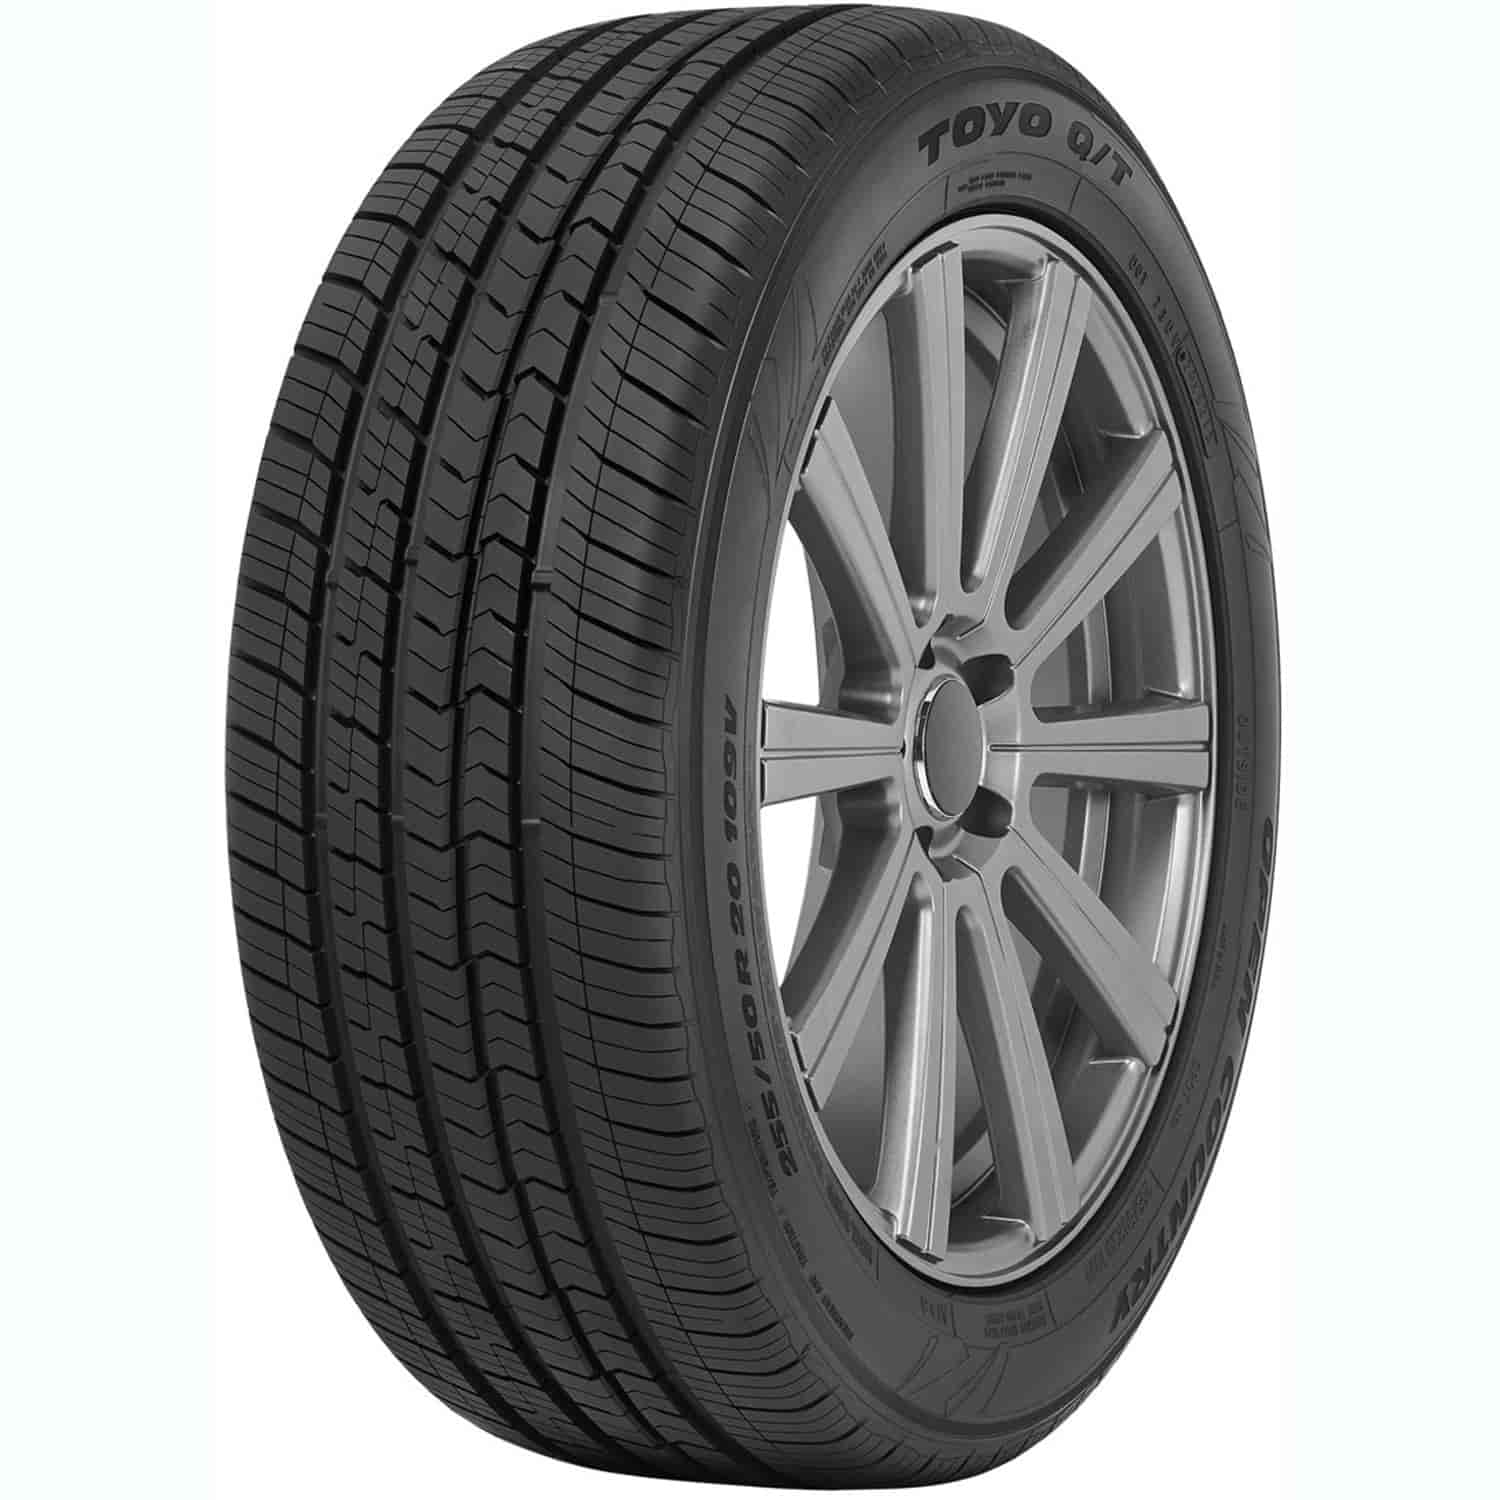 OPEN COUNTRY Q/T 235/65R17 108V XL